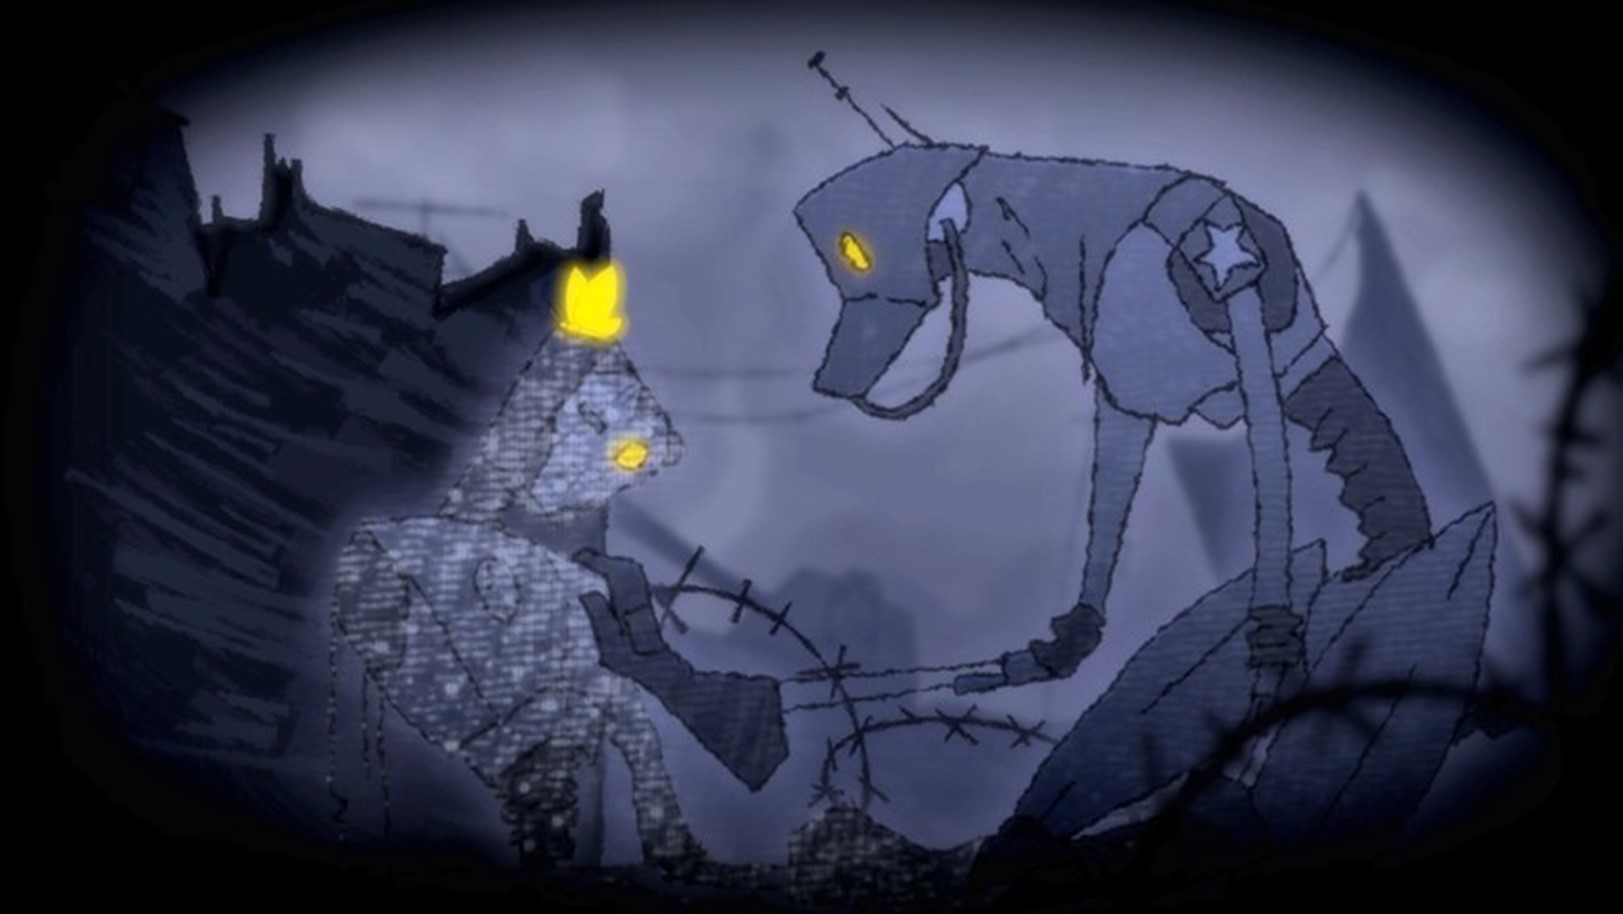 Grayscale robot and a glowing yellow butterfly